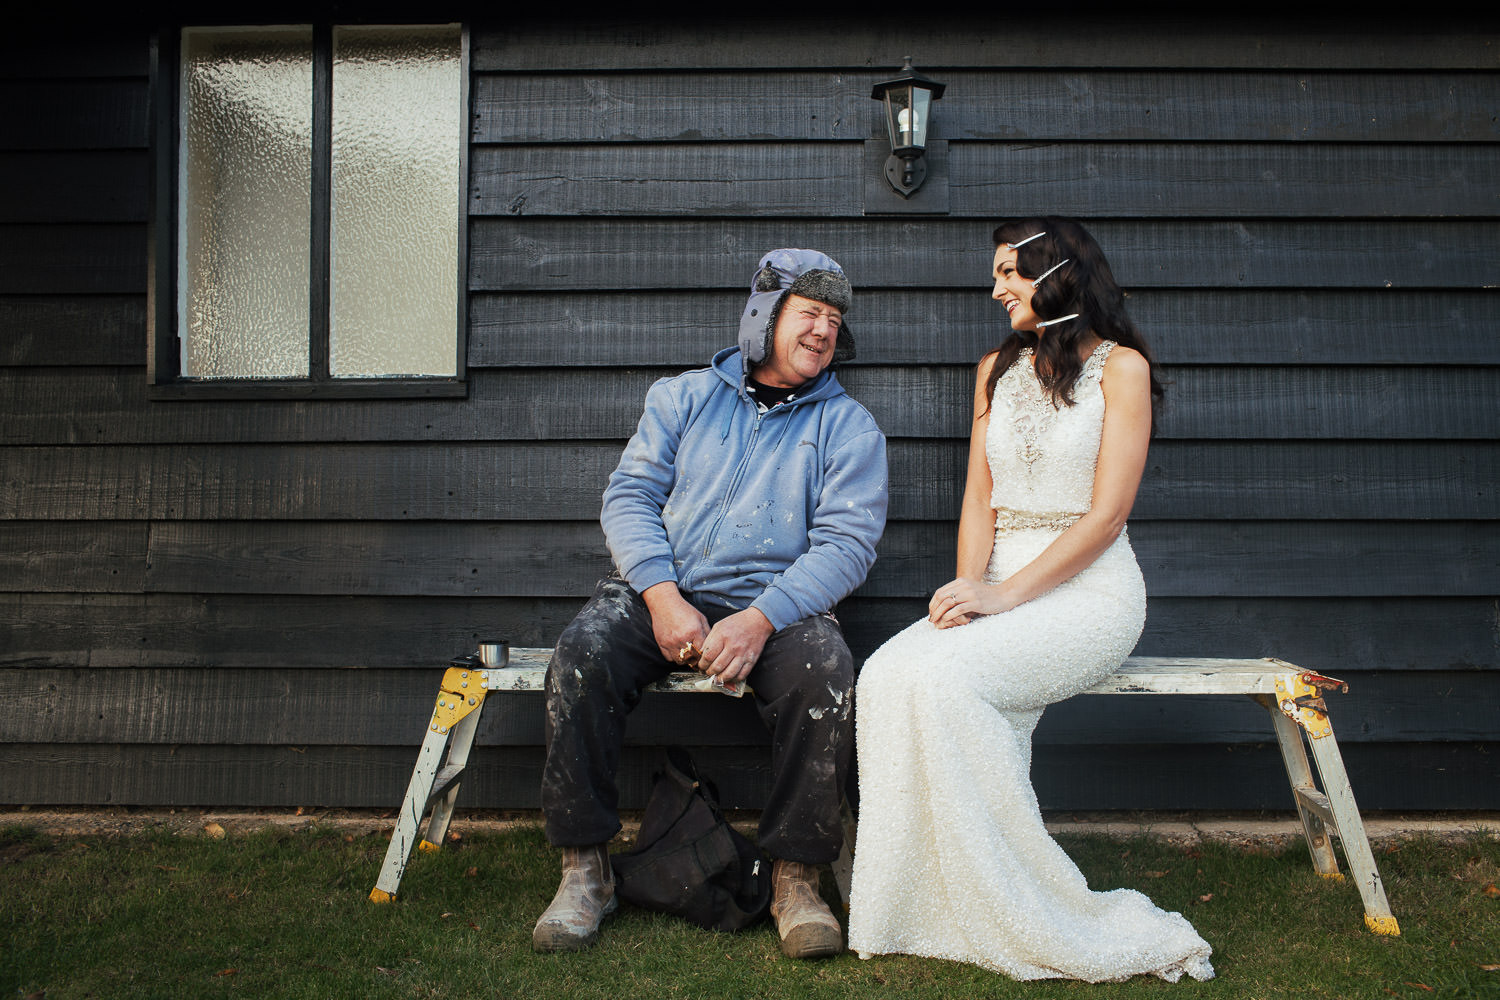 At the wedding venue High House near South Woodham, Amelia in a wedding dress sits on a workbench with a handyman on his break.